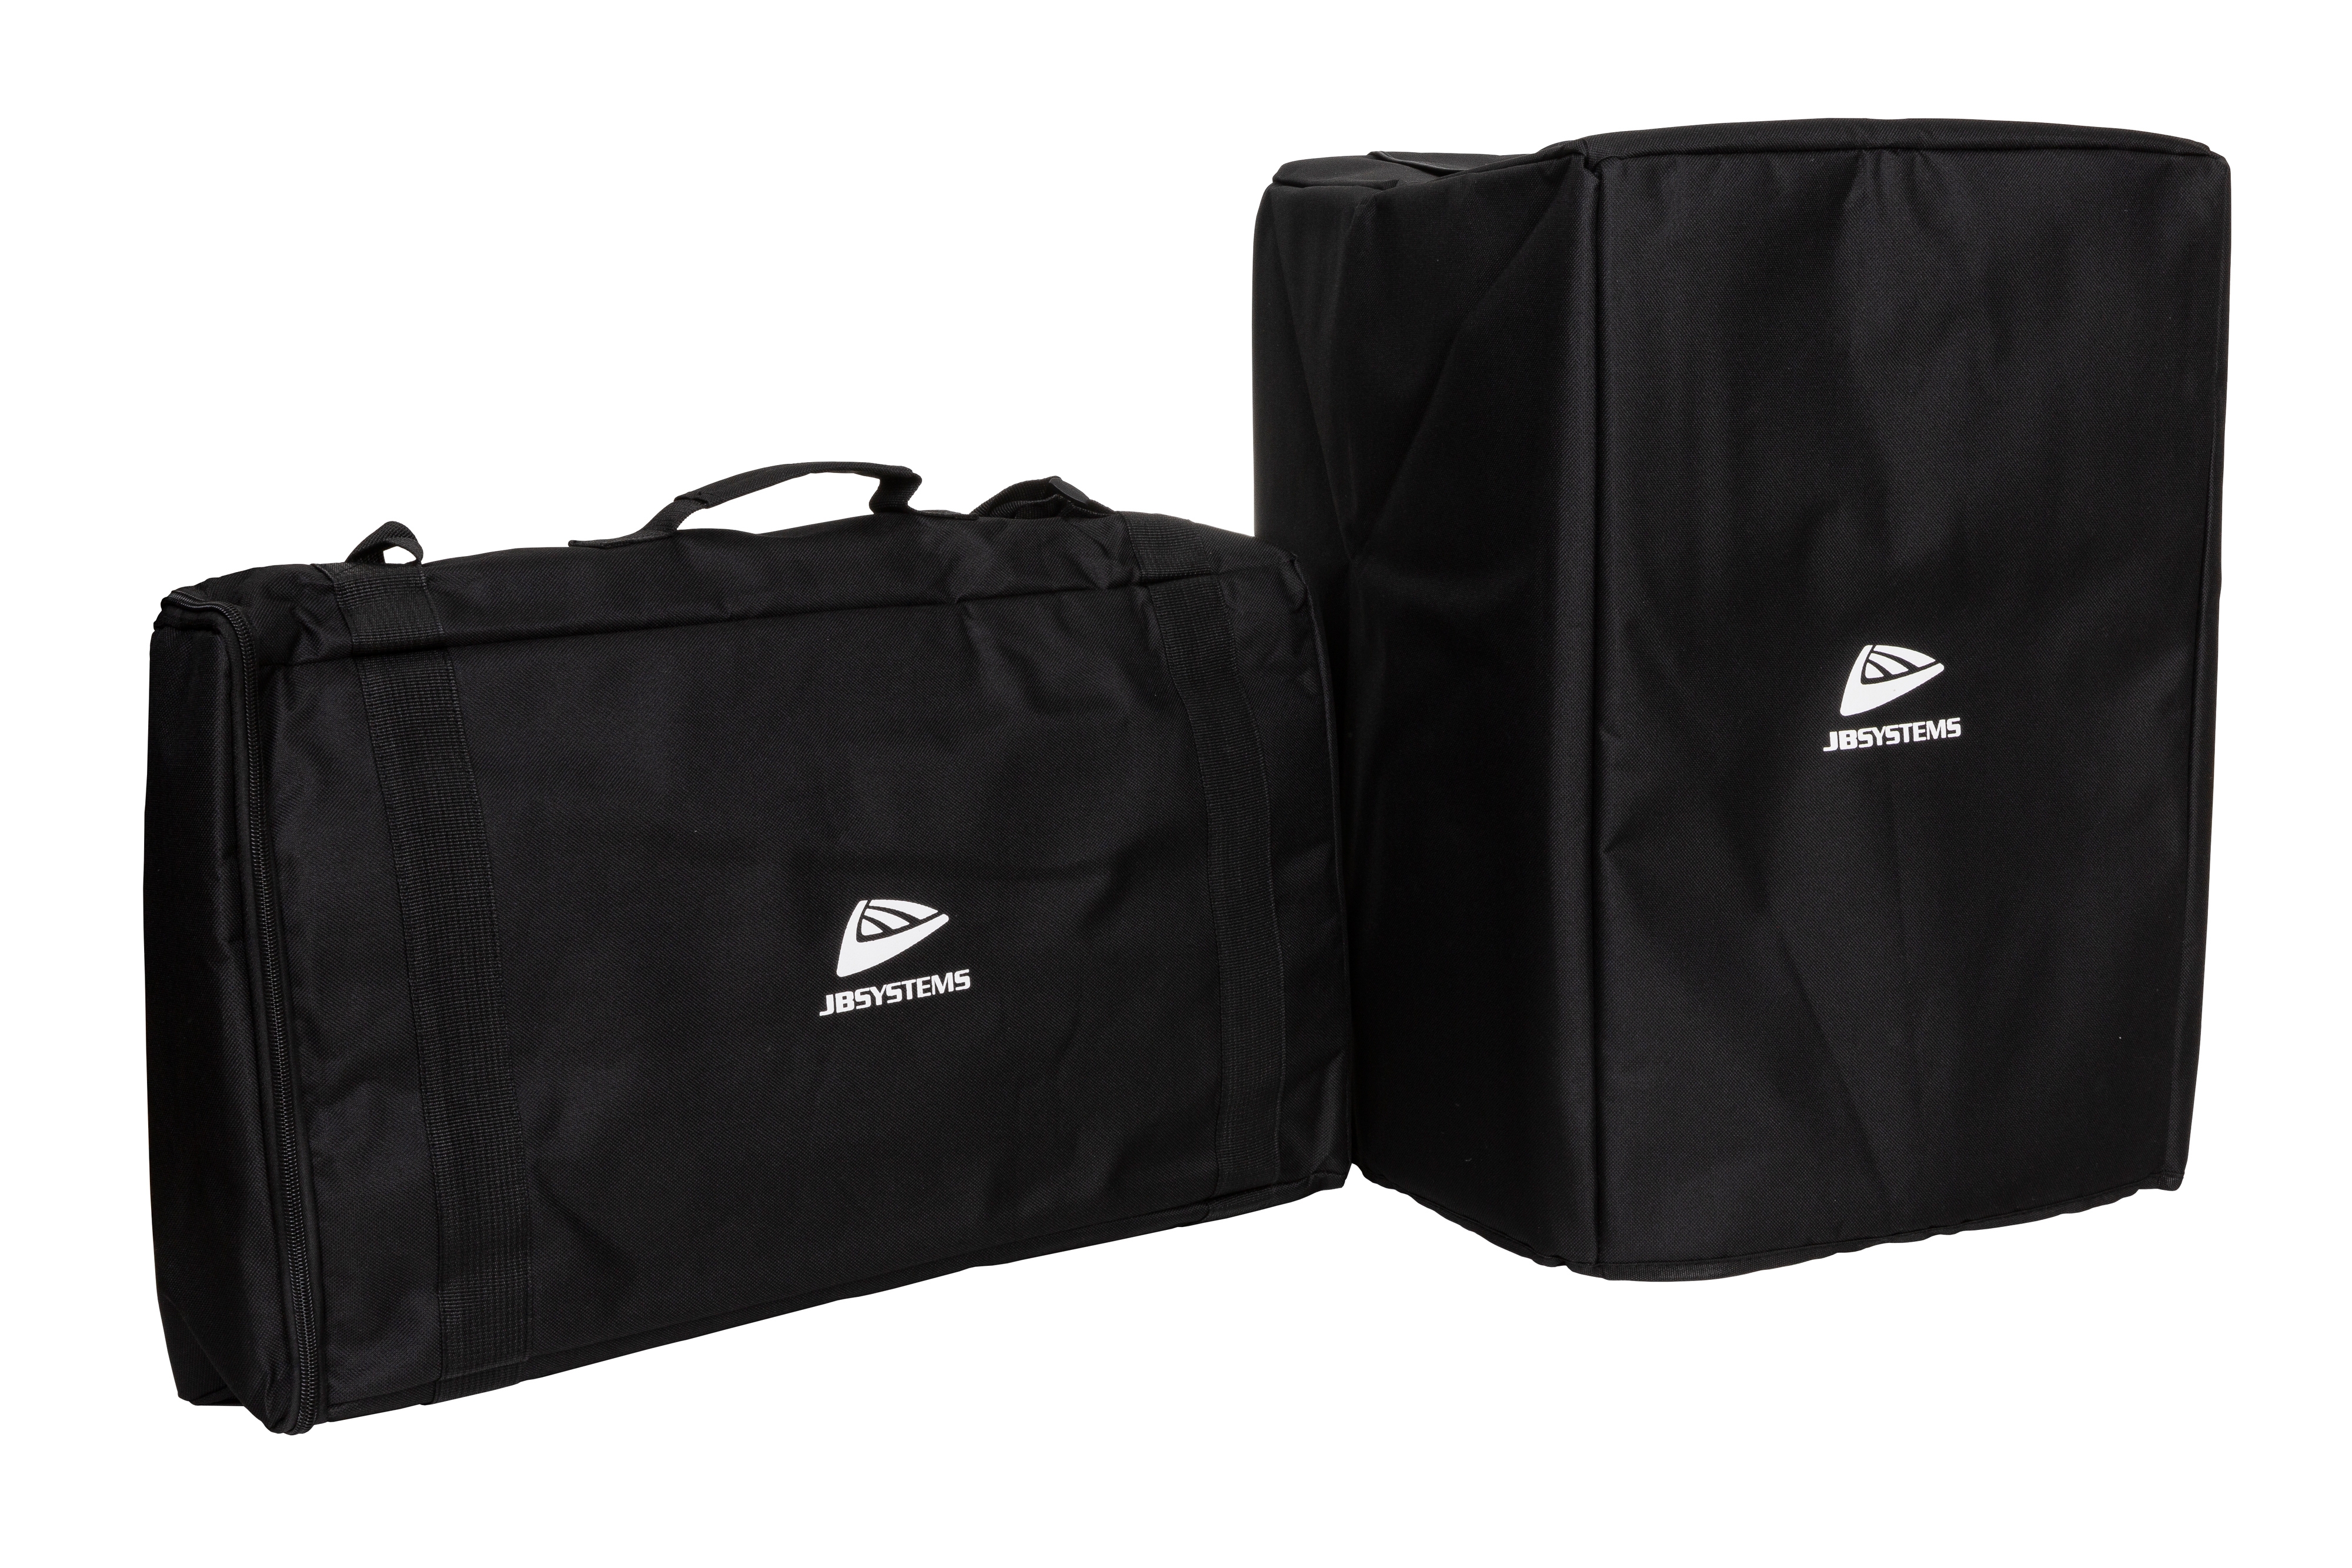 Transport bag + protection cover for PPC-081 and PPC-082B